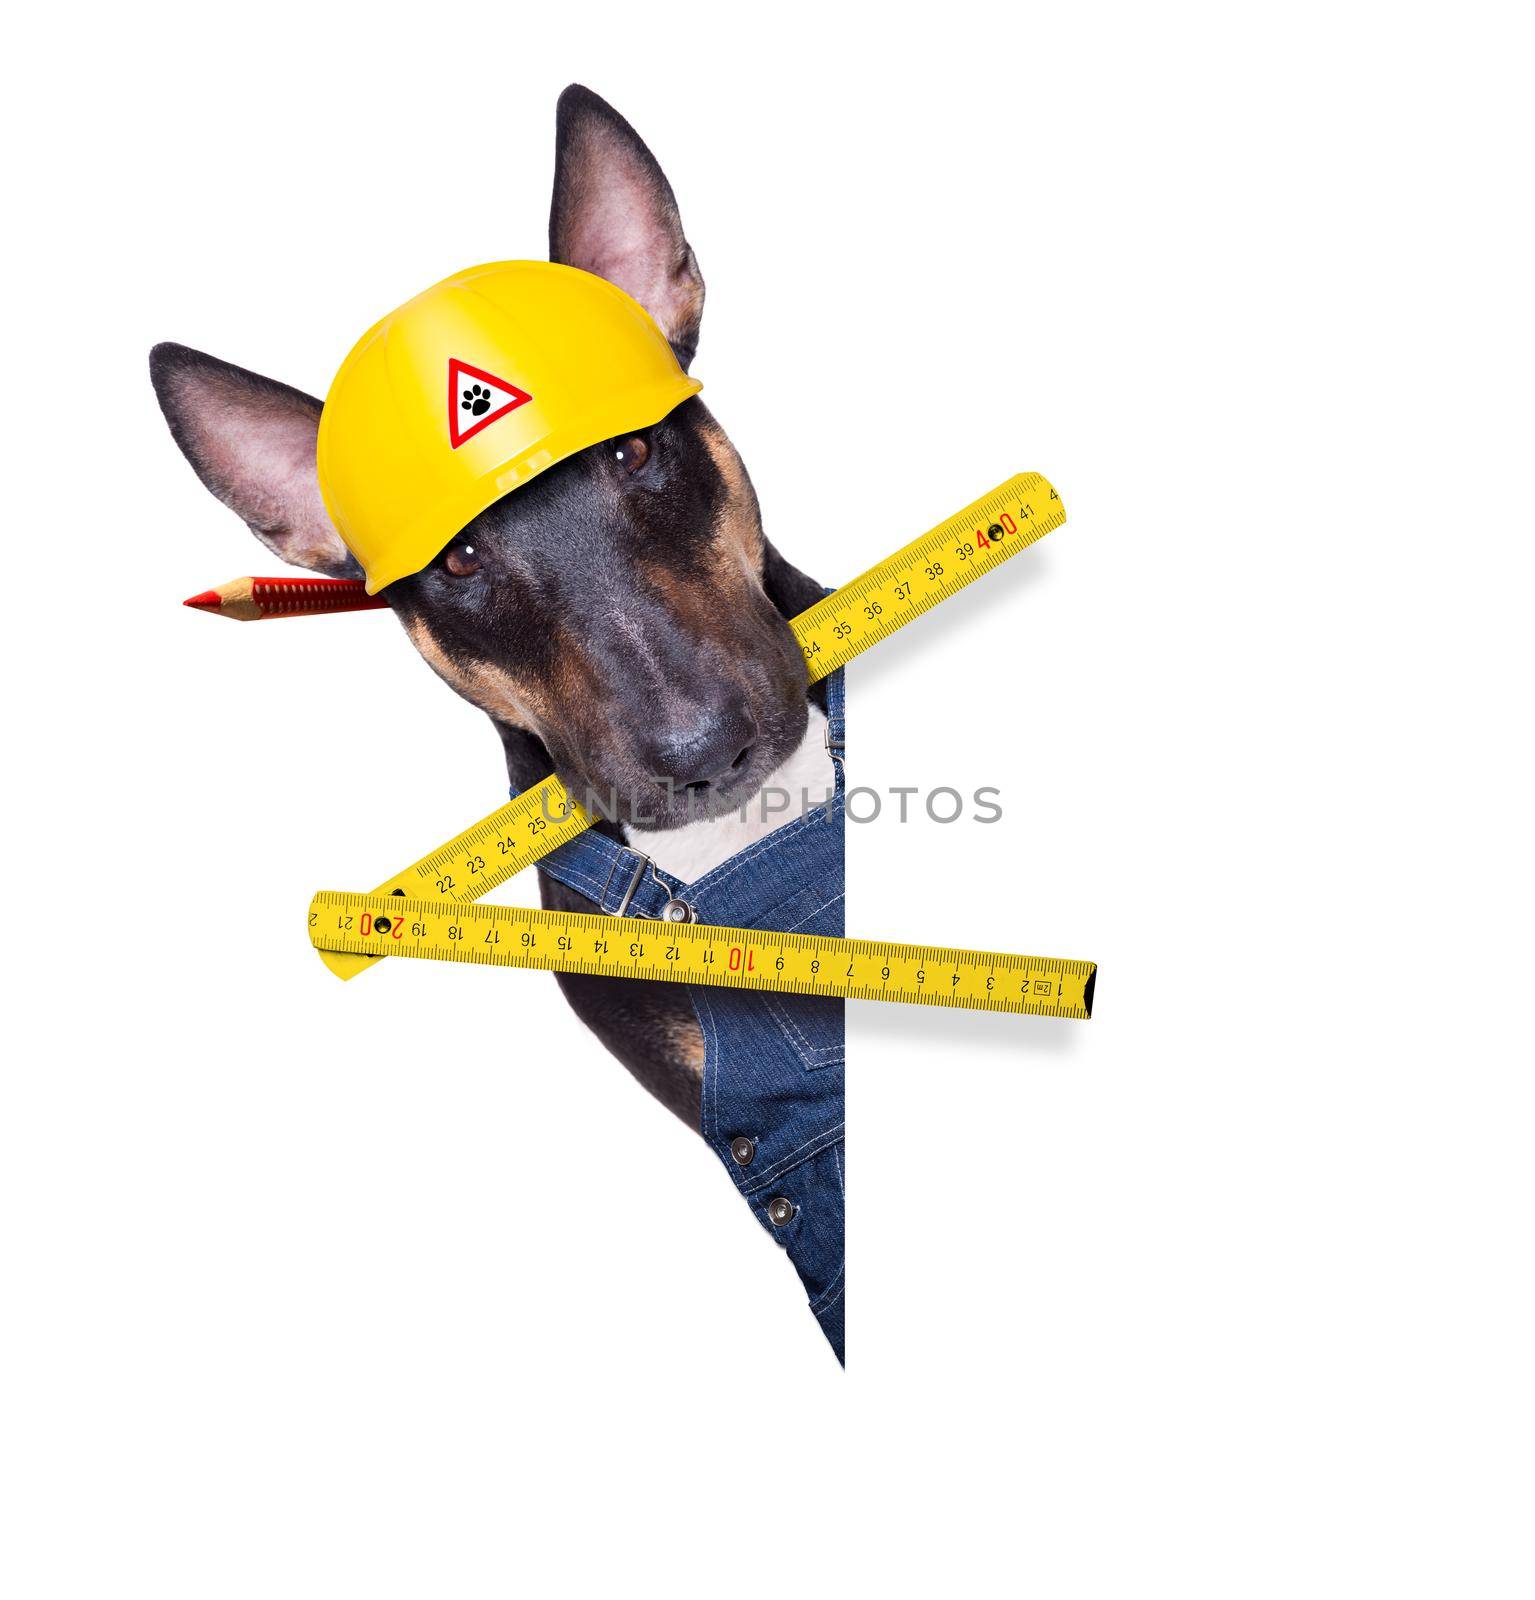 handyman pit bull terrier dog worker with work tool in mouth, ready to repair, fix everything at home, isolated on white background